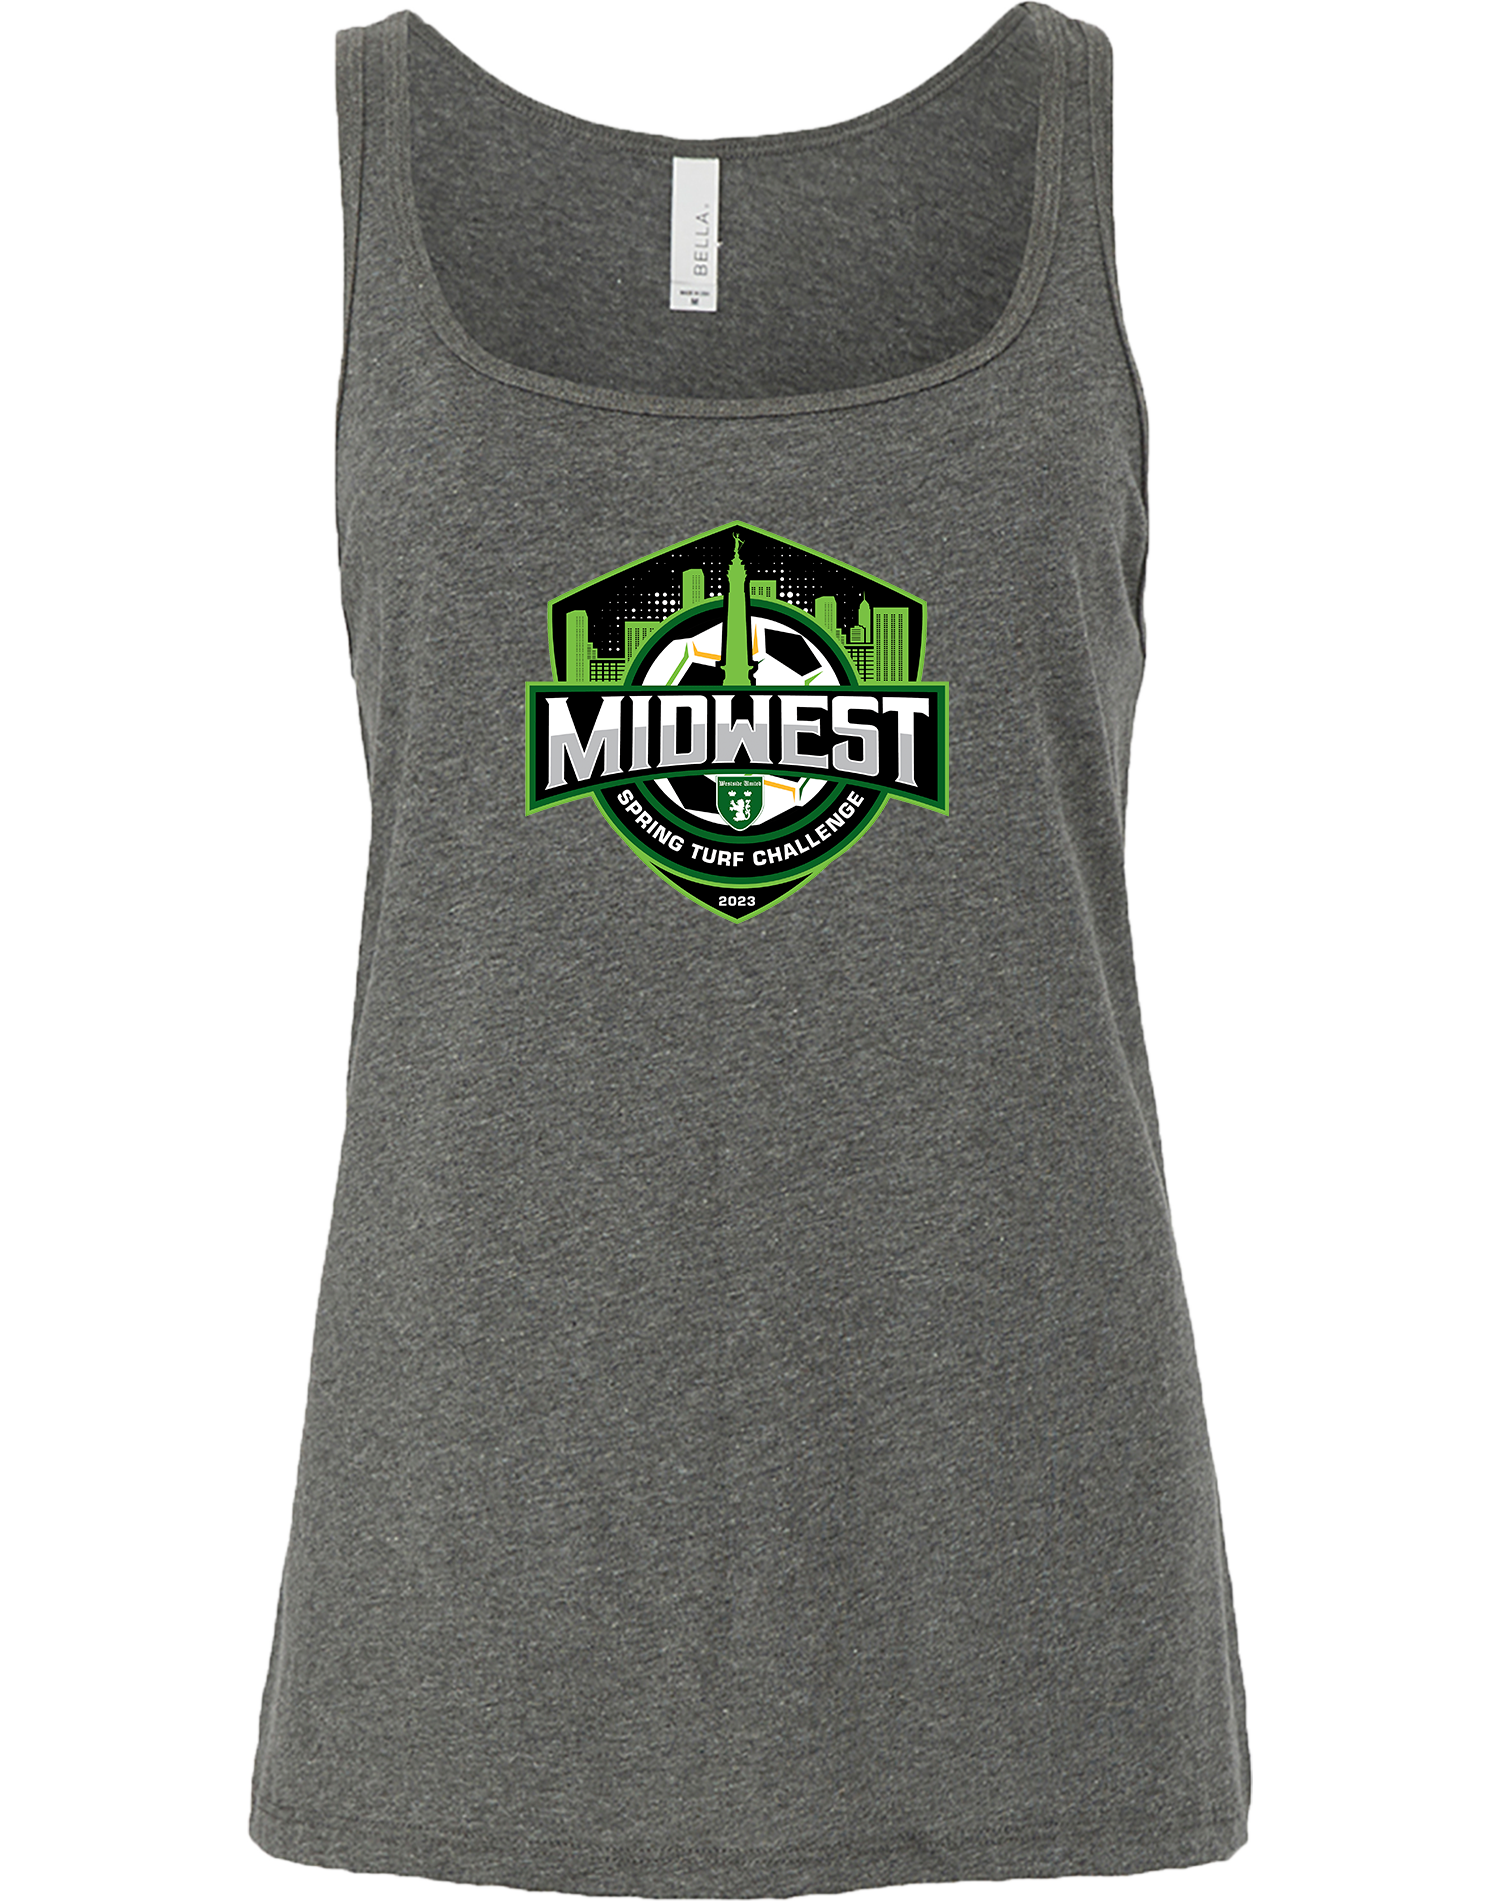 TANK TOP - 2023 Midwest Spring Turf Challenge